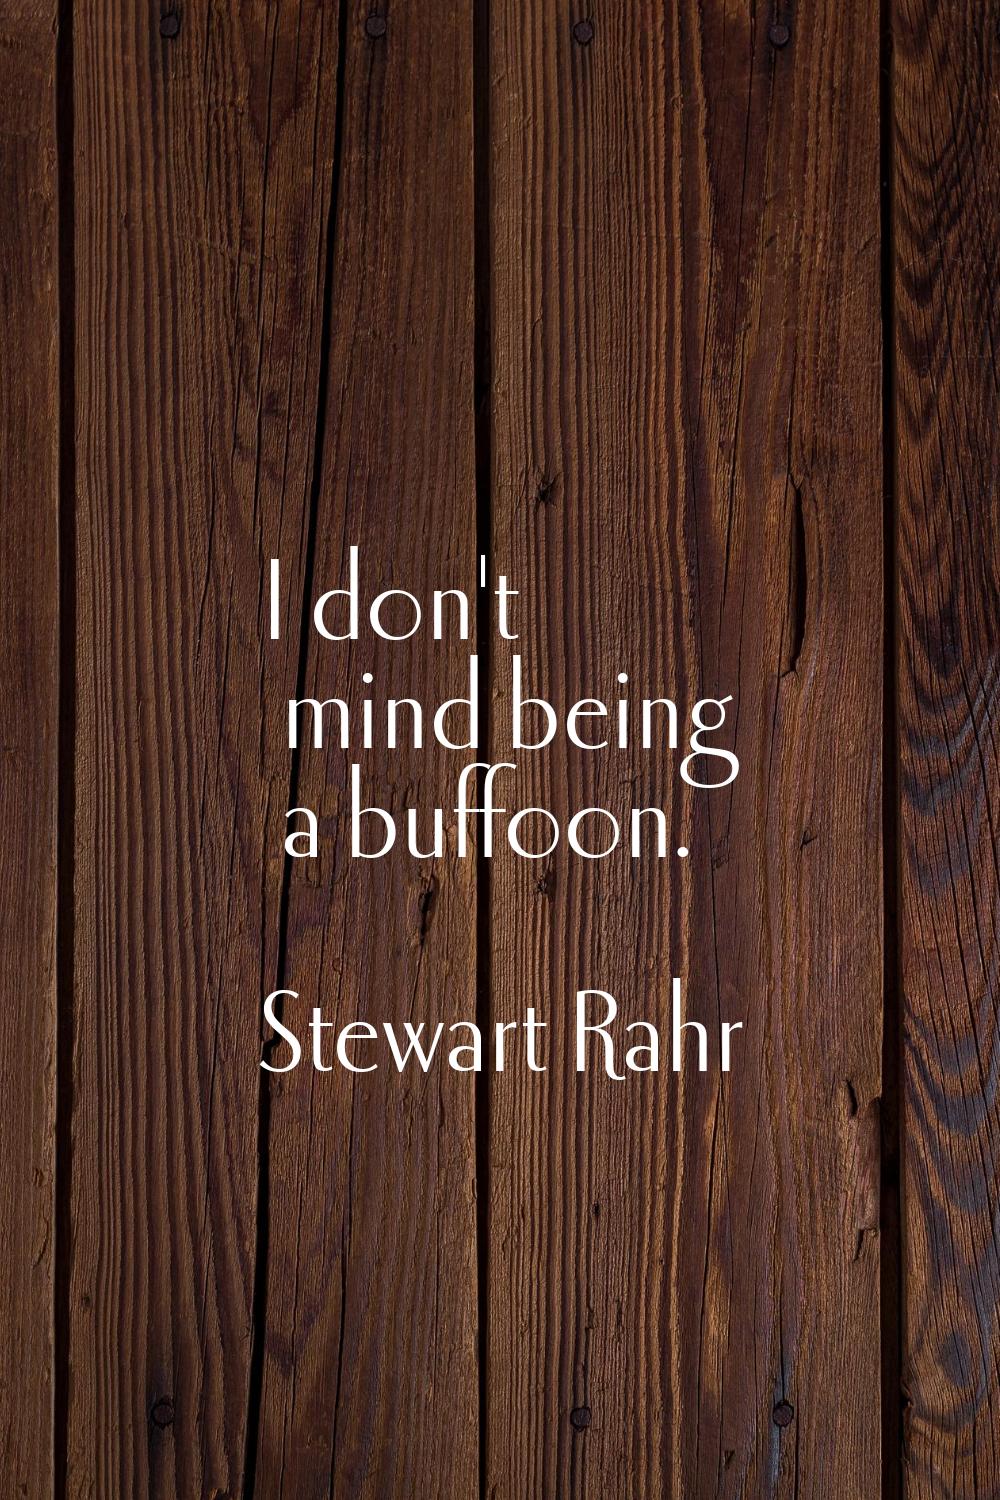 I don't mind being a buffoon.